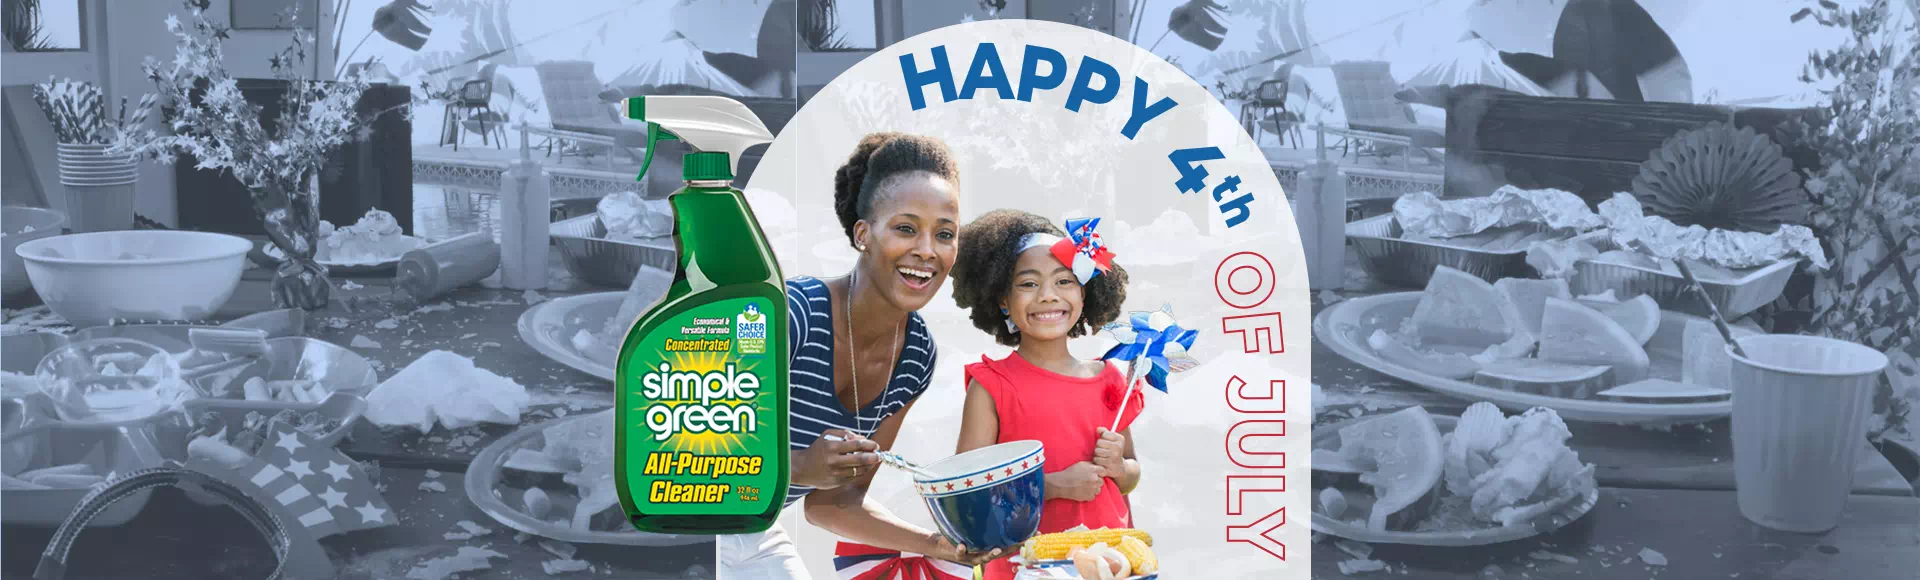 Happy 4th of July from Simple Green